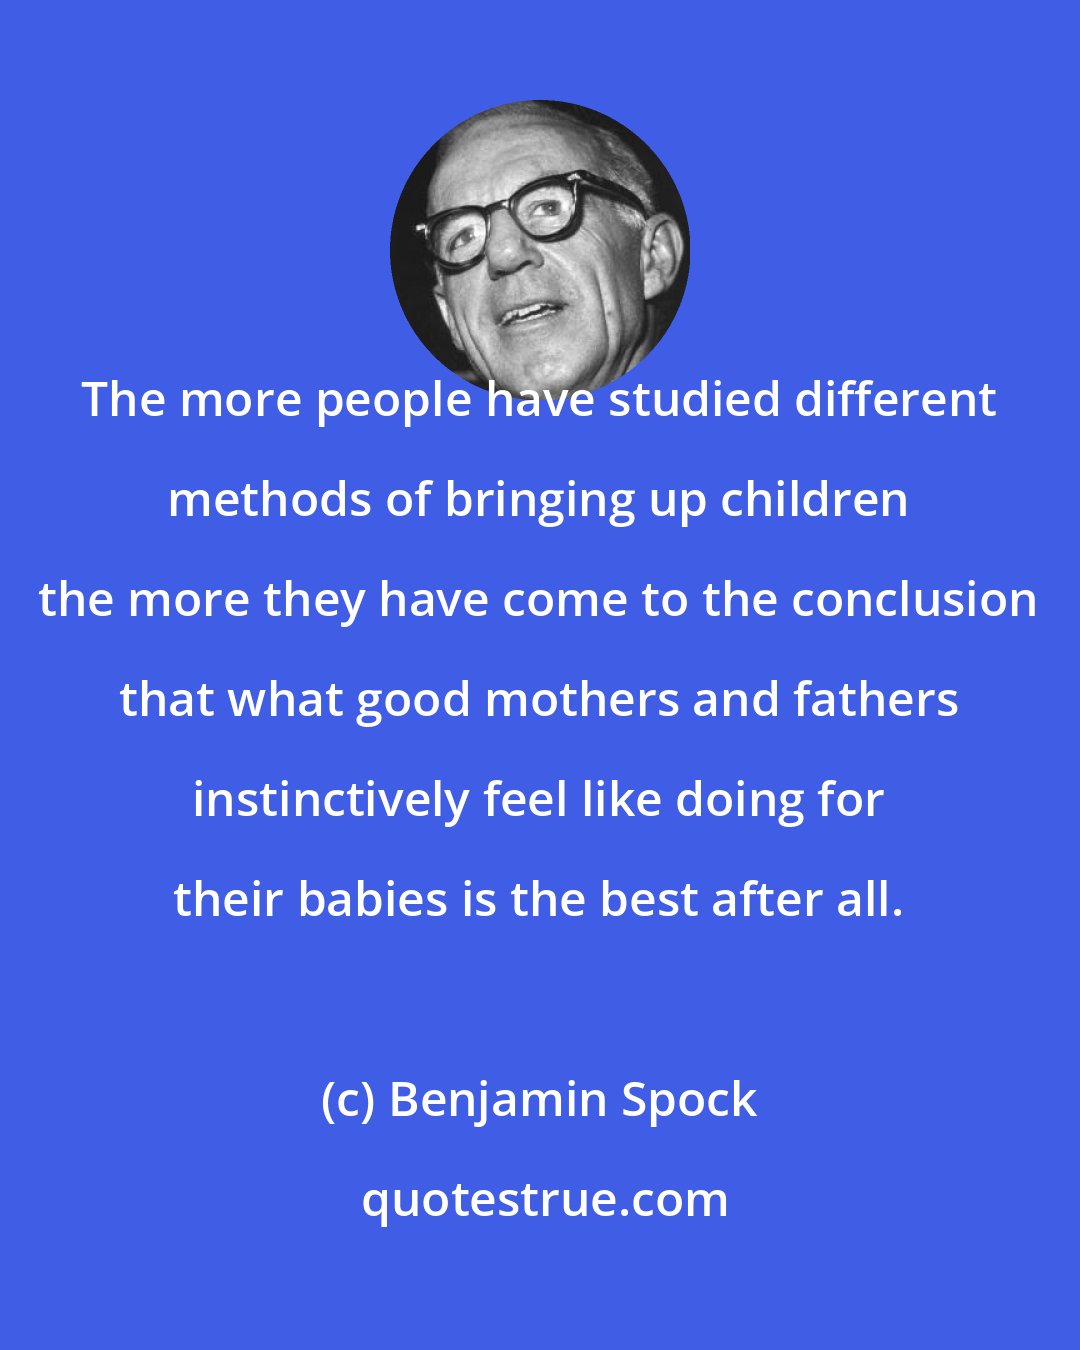 Benjamin Spock: The more people have studied different methods of bringing up children the more they have come to the conclusion that what good mothers and fathers instinctively feel like doing for their babies is the best after all.